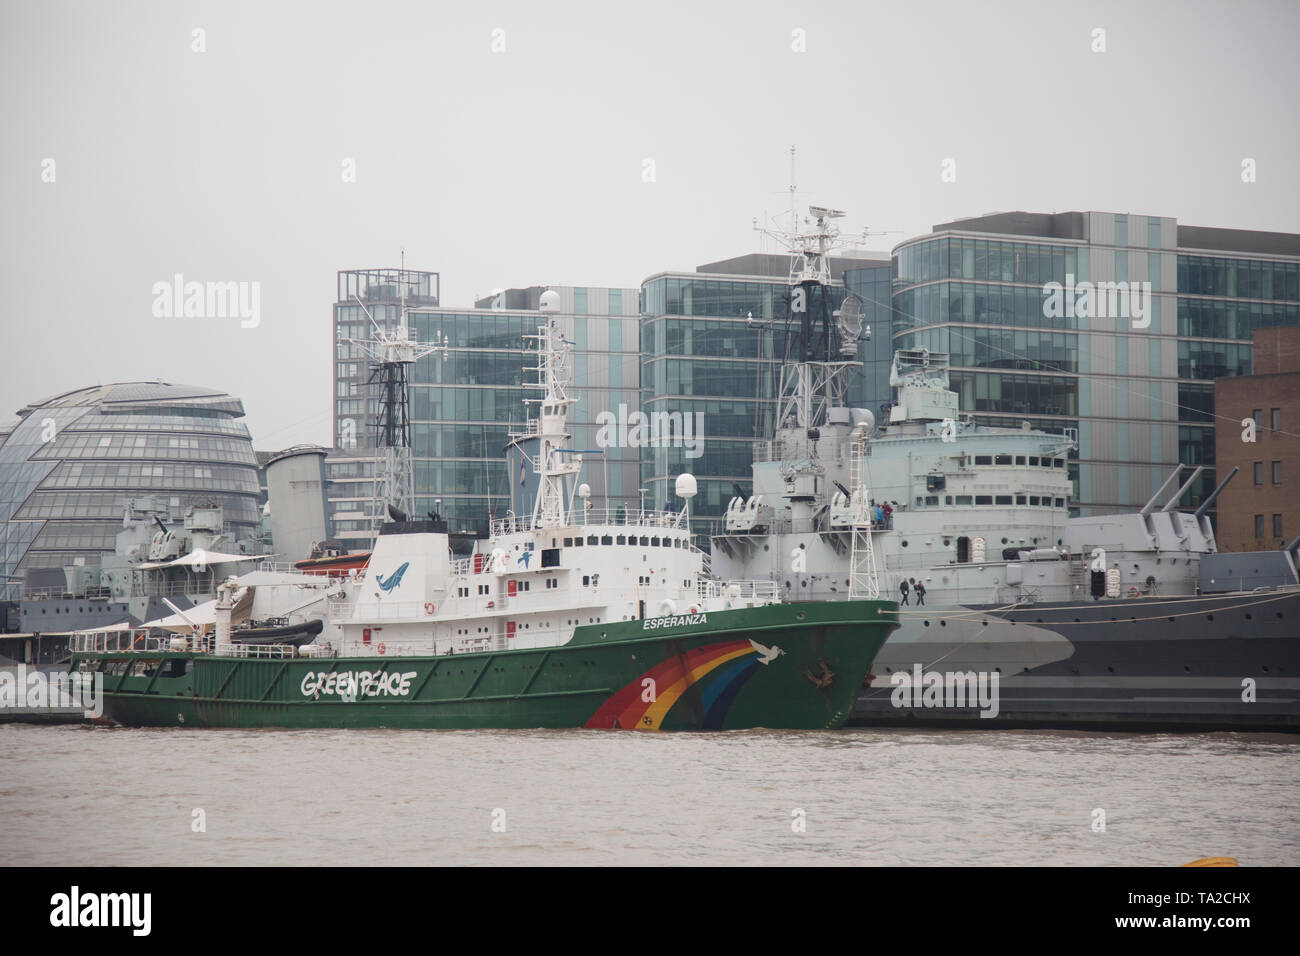 Greenpeace ship Esperanza docked alongside HMS Belfast on the River Thames in London, United Kingdom. Greenpeace is a non-governmental environmental organization with offices in over 39 countries. Stock Photo